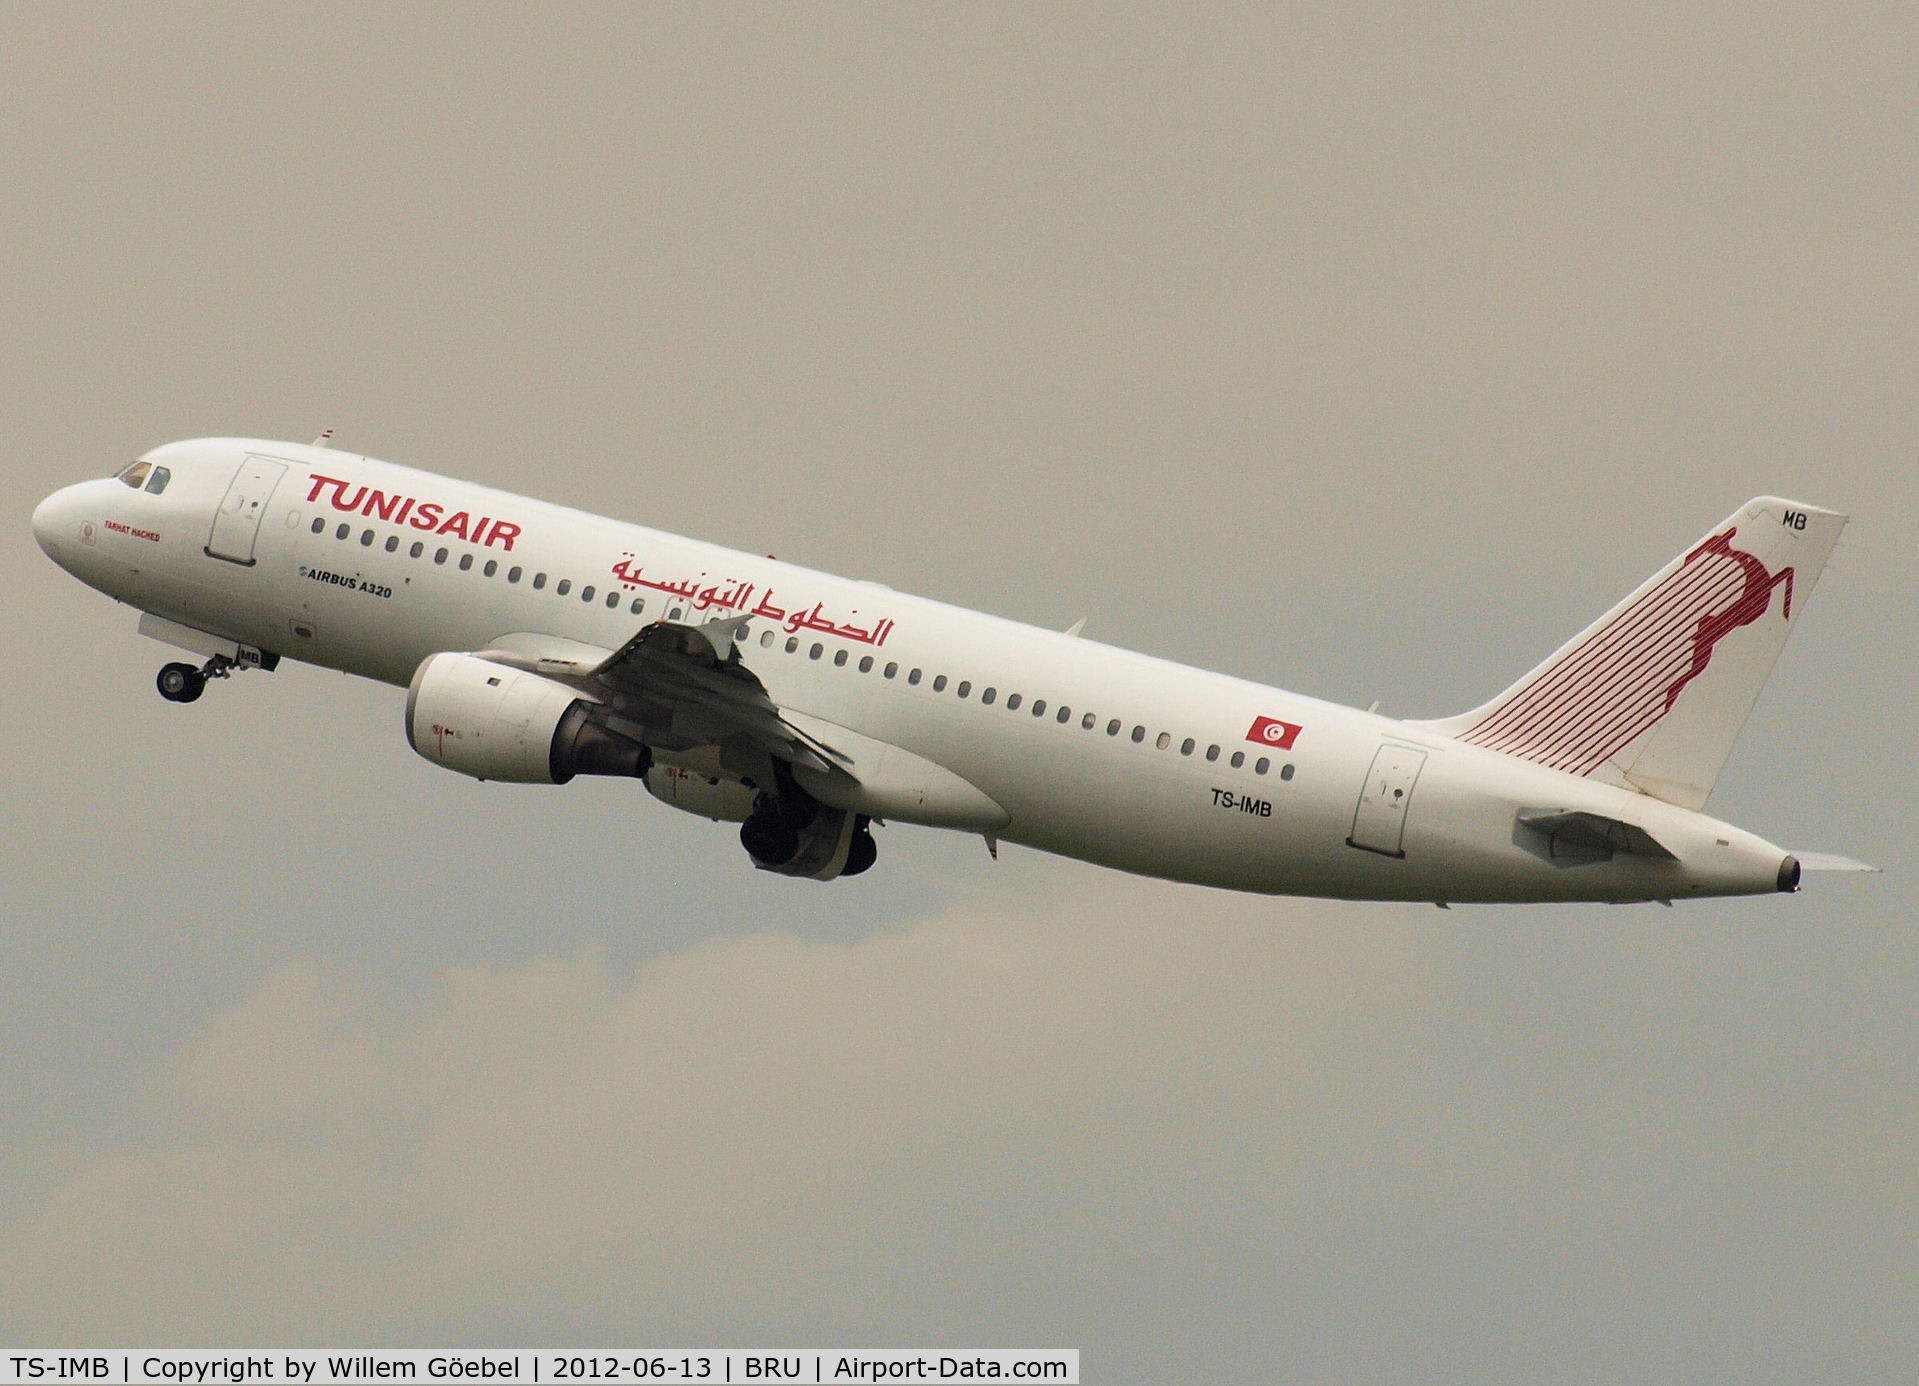 TS-IMB, 1990 Airbus A320-211 C/N 0119, Take off from Brussel Airport